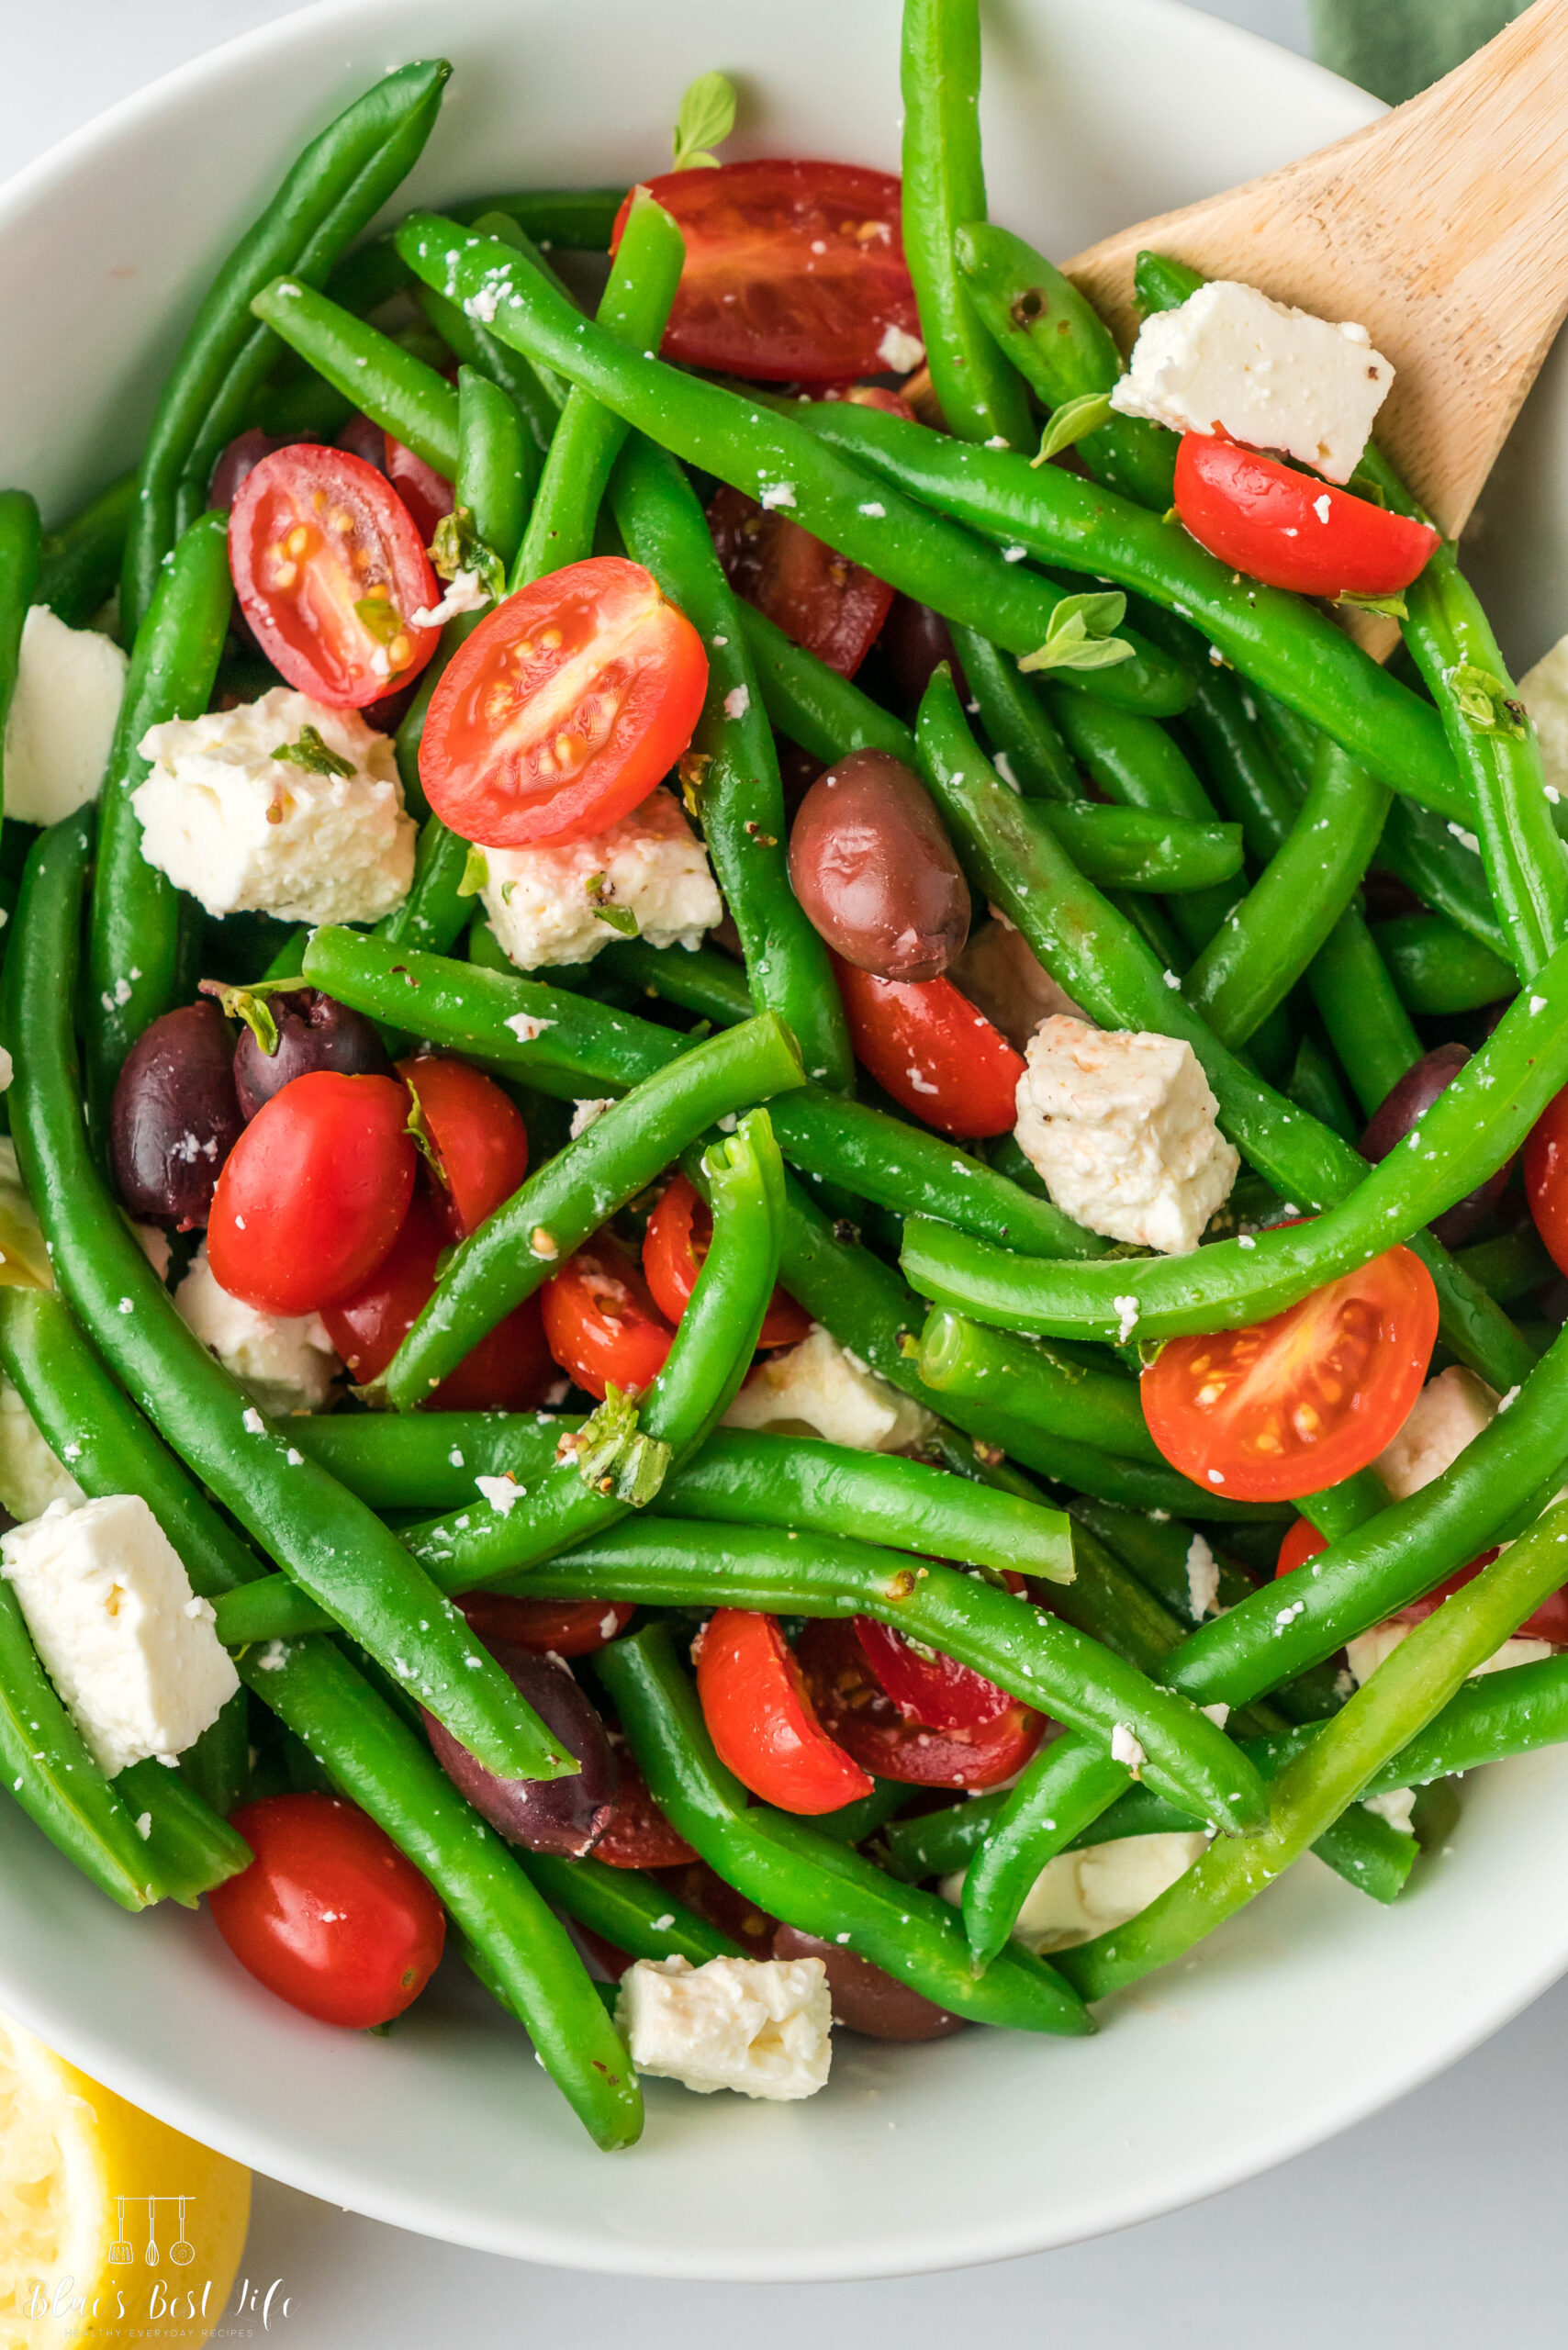 A close up picture of Mediterranean green beans.